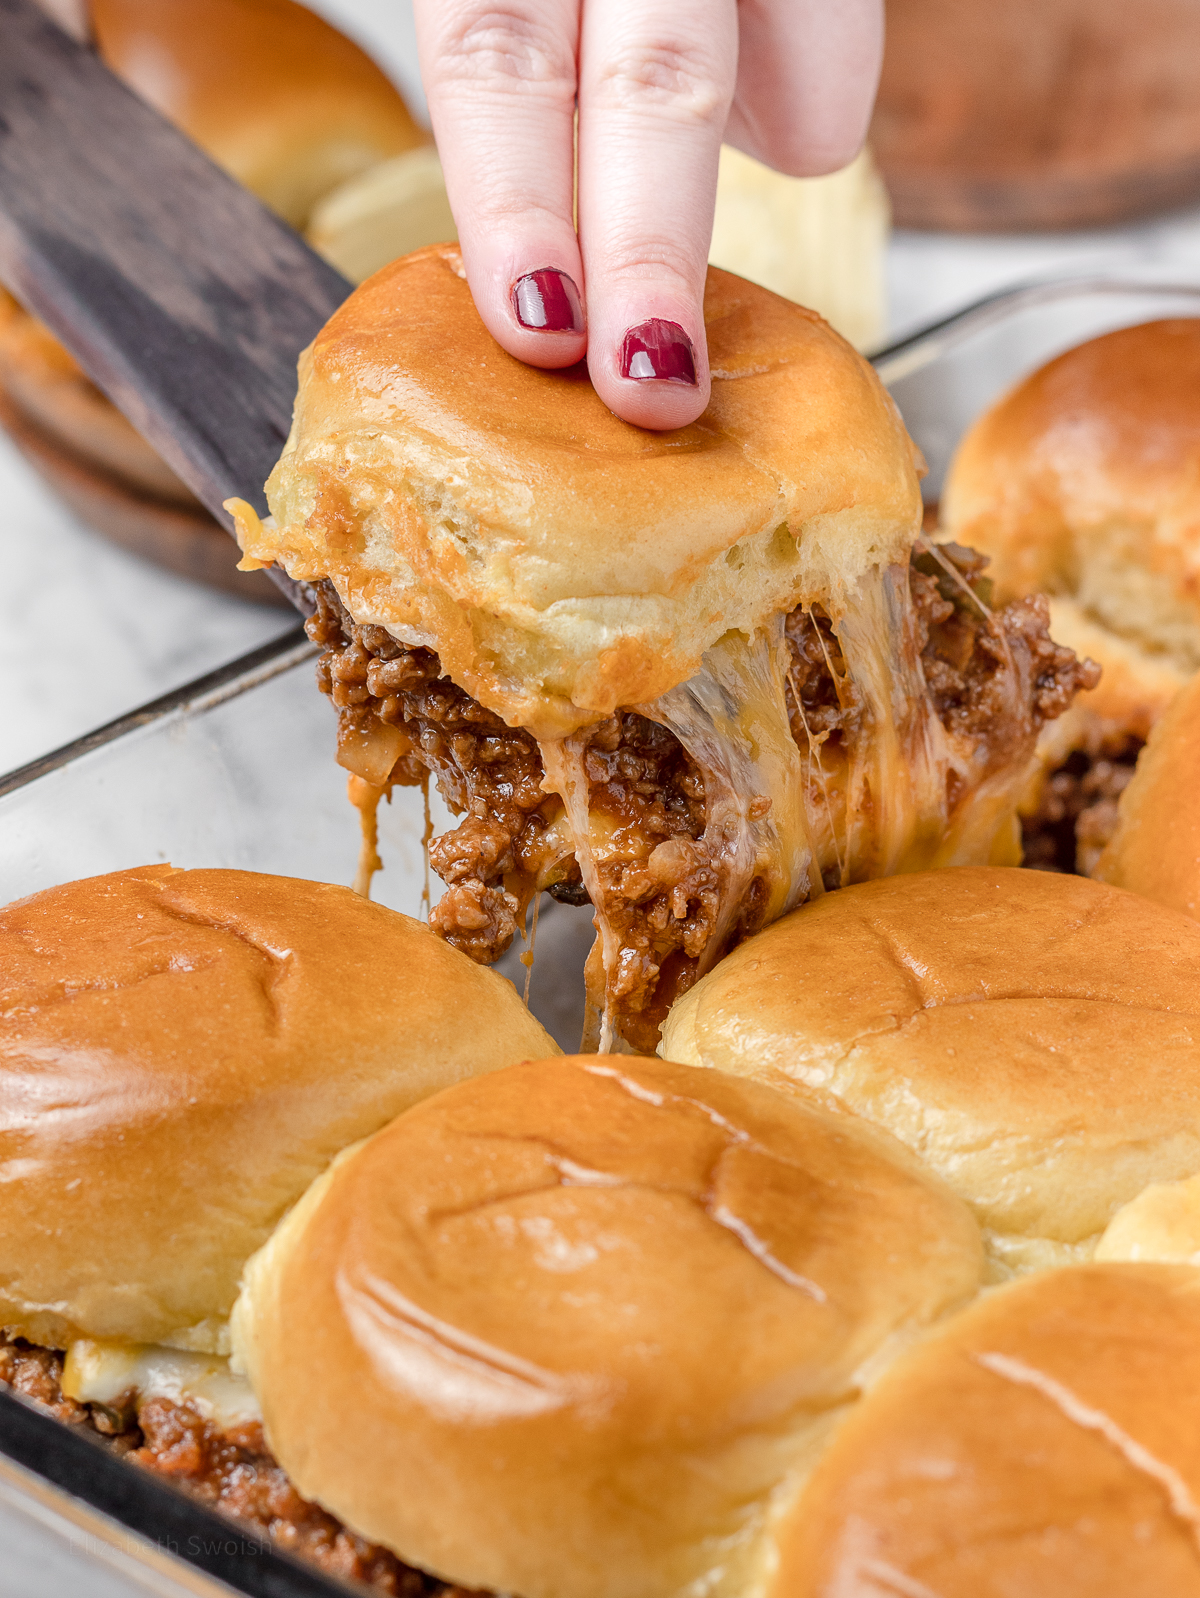 Pulling a slider out of the pan to see cheese pull and tons of Sloppy Joe filling.